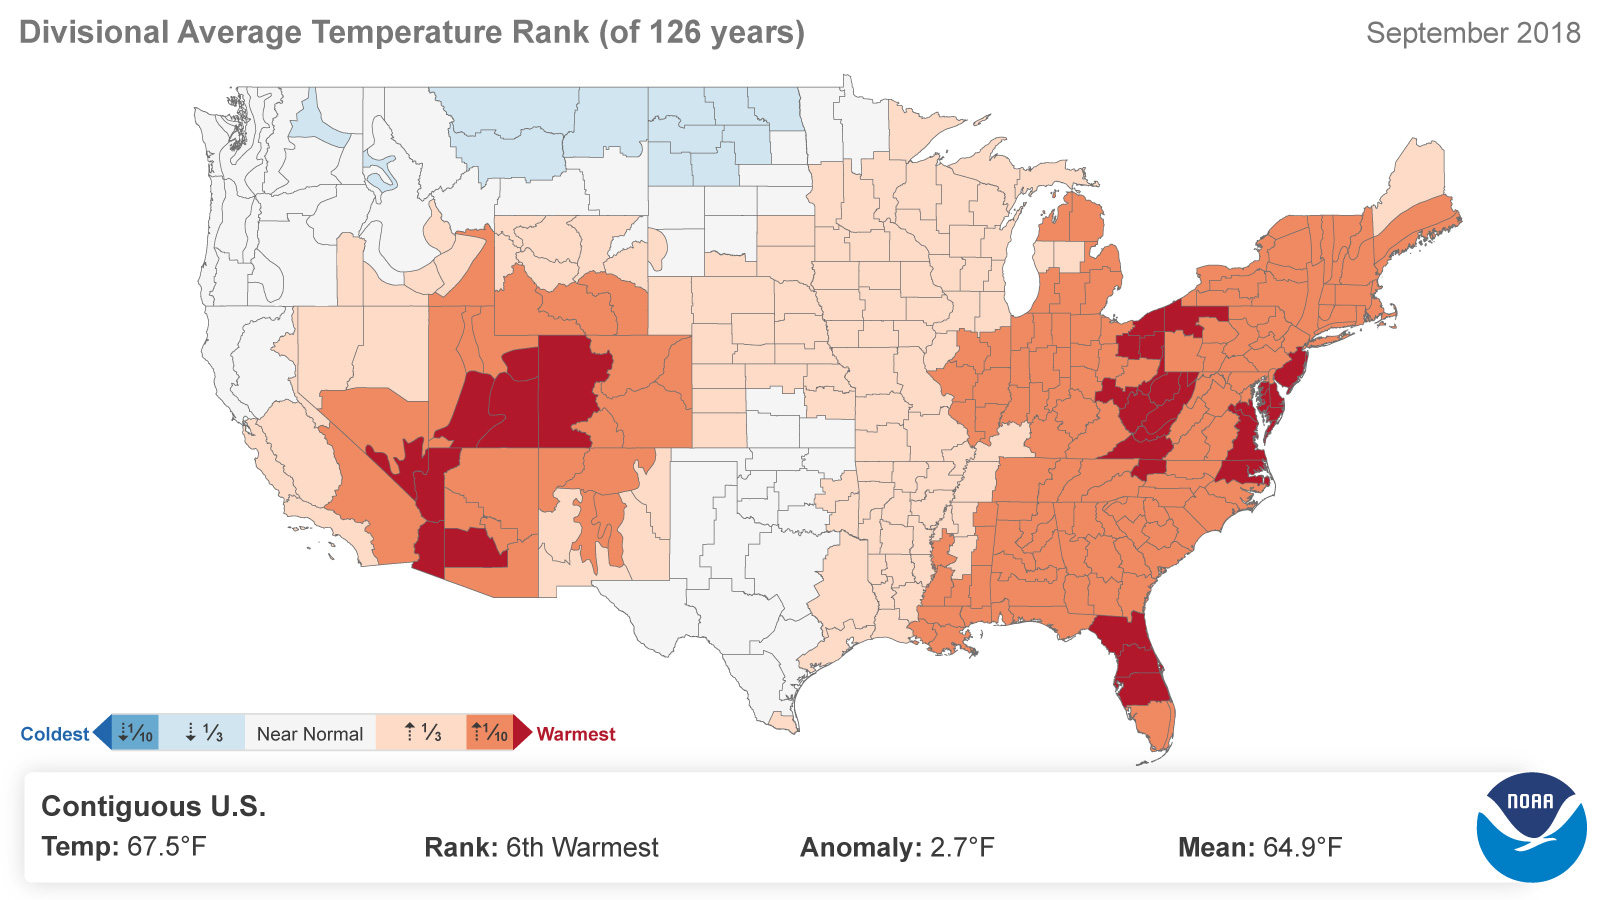 Monthly Climate Conditions - Interactive Map